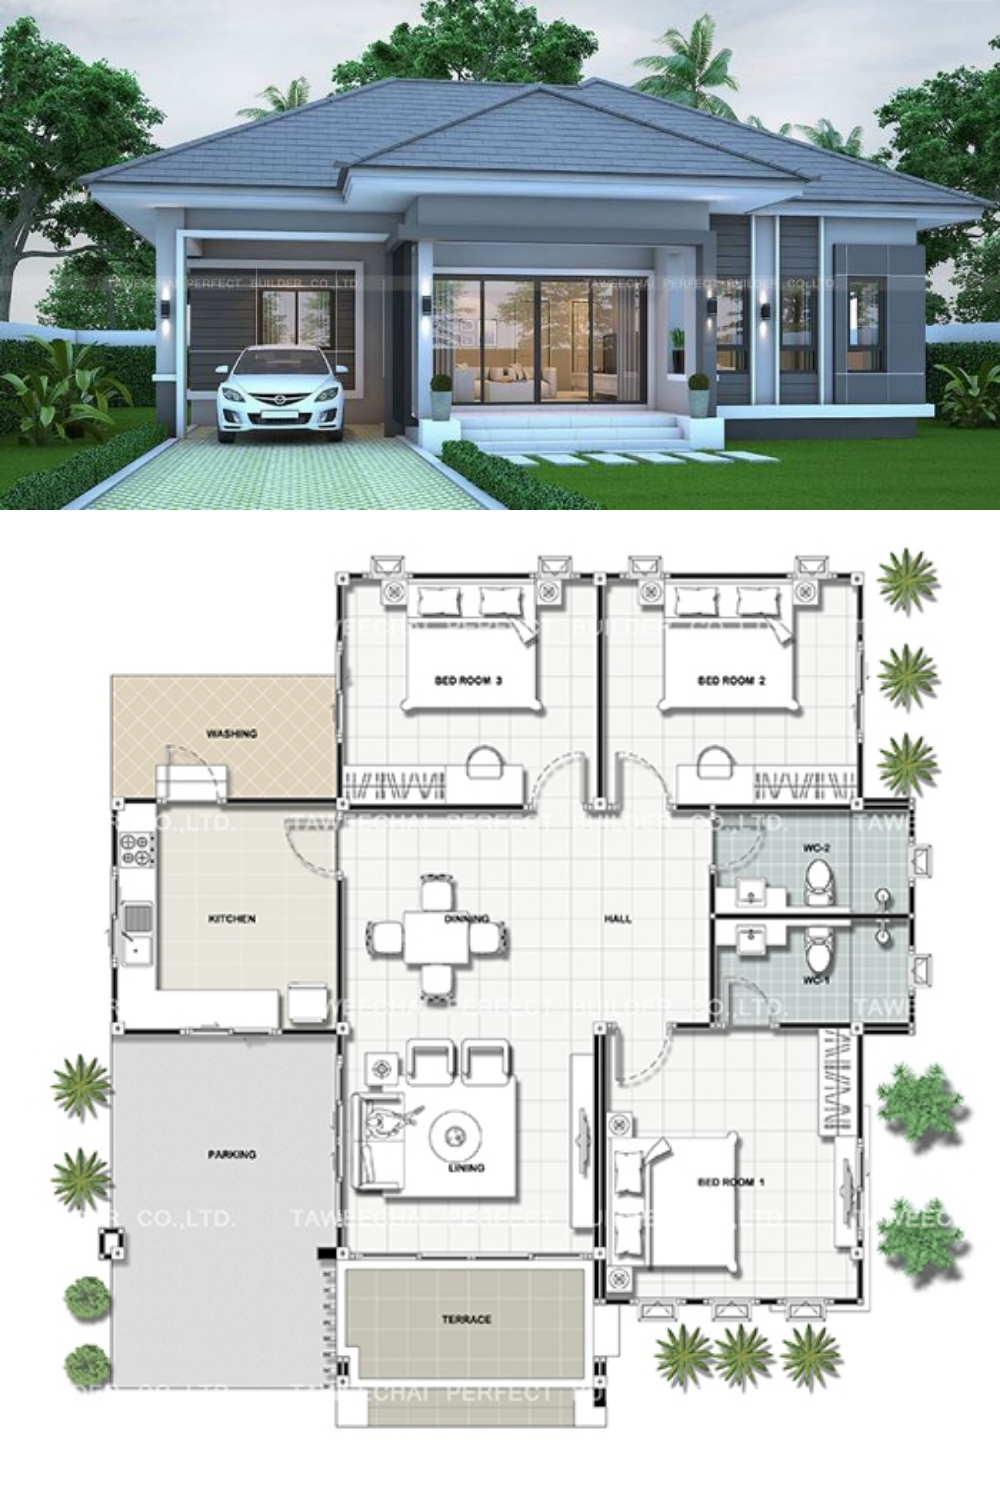 That Gray Bungalow with Three Bedrooms Pinoy ePlans